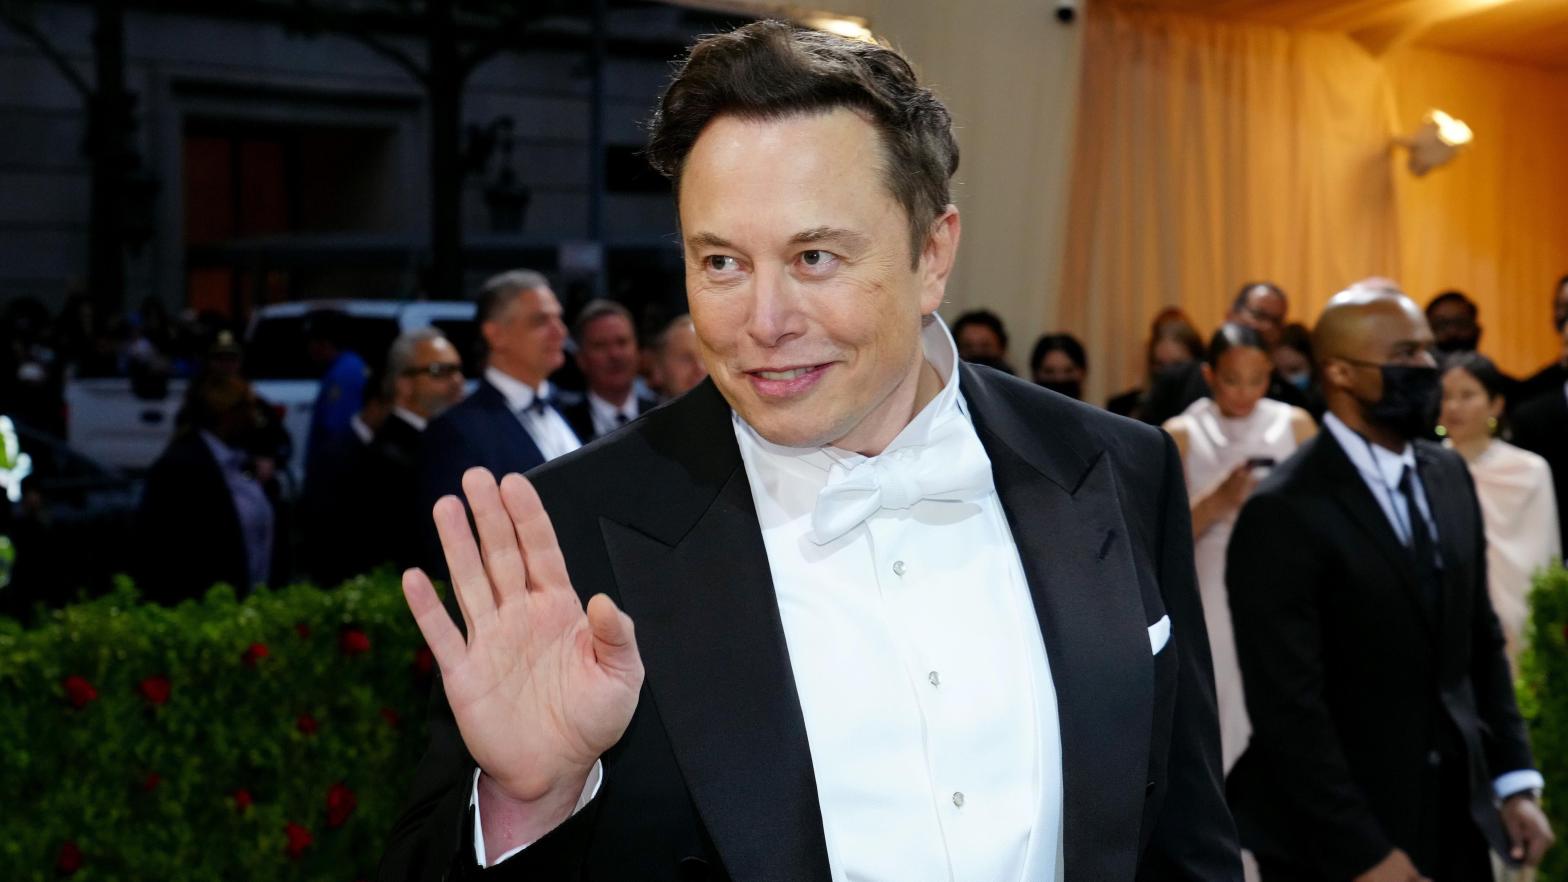 Tesla CEO Elon Musk attends The 2022 Met Gala at The Metropolitan Museum of Art on May 2, 2022  in New York City.  (Photo: Jeff Kravitz/FilmMagic, Getty Images)